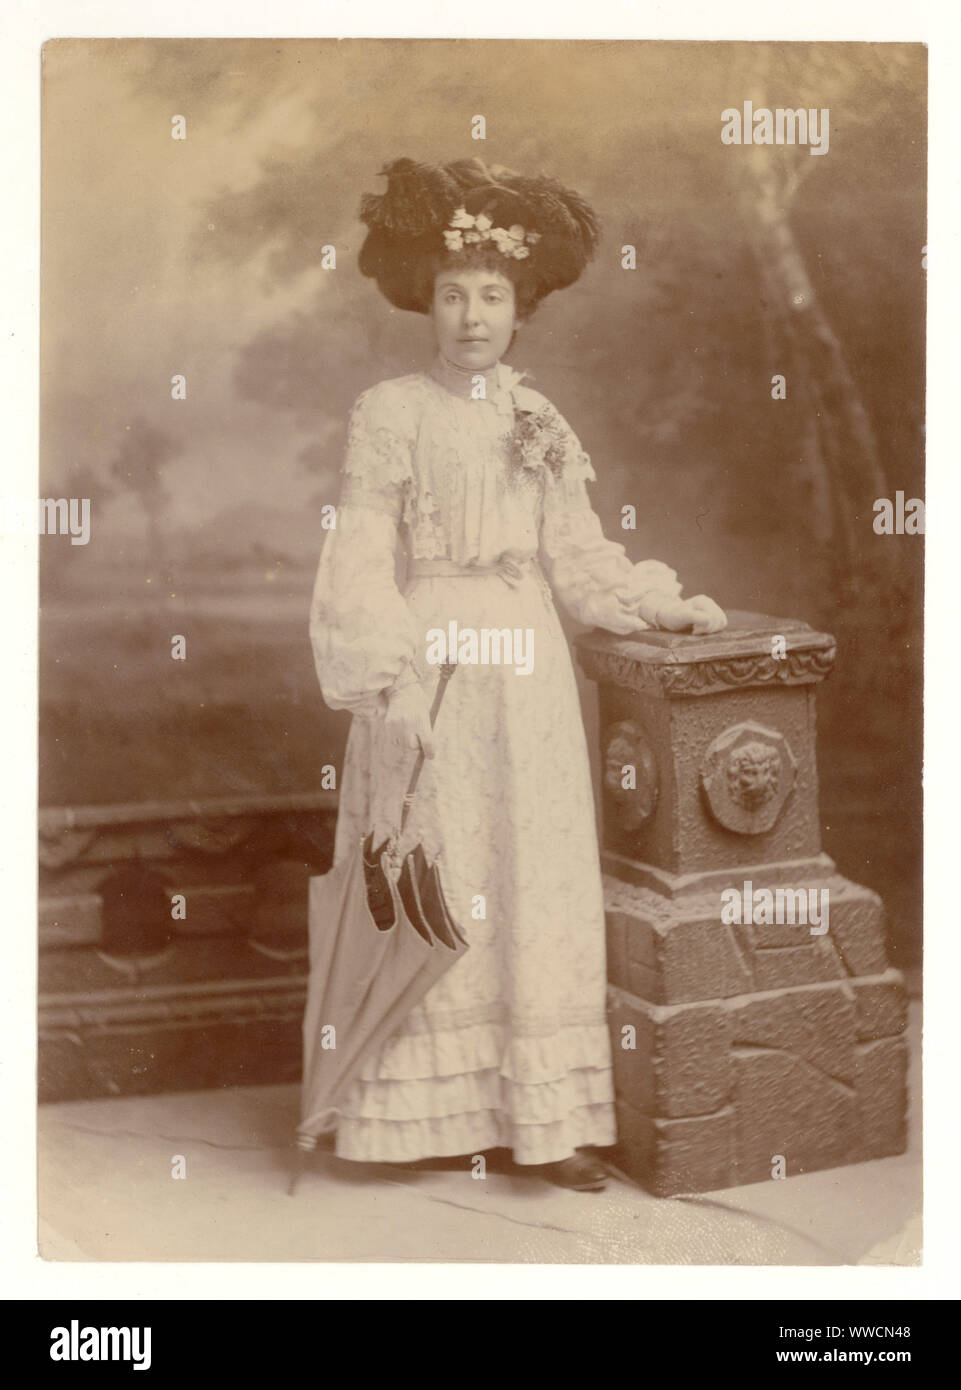 Original, clear, Edwardian Studio portrait photograph of fashionable glamorous Edwardian lady wearing a summer outfit, elaborate hat adorned with many feathers, holding a parasol, circa 1903, U.K. Stock Photo